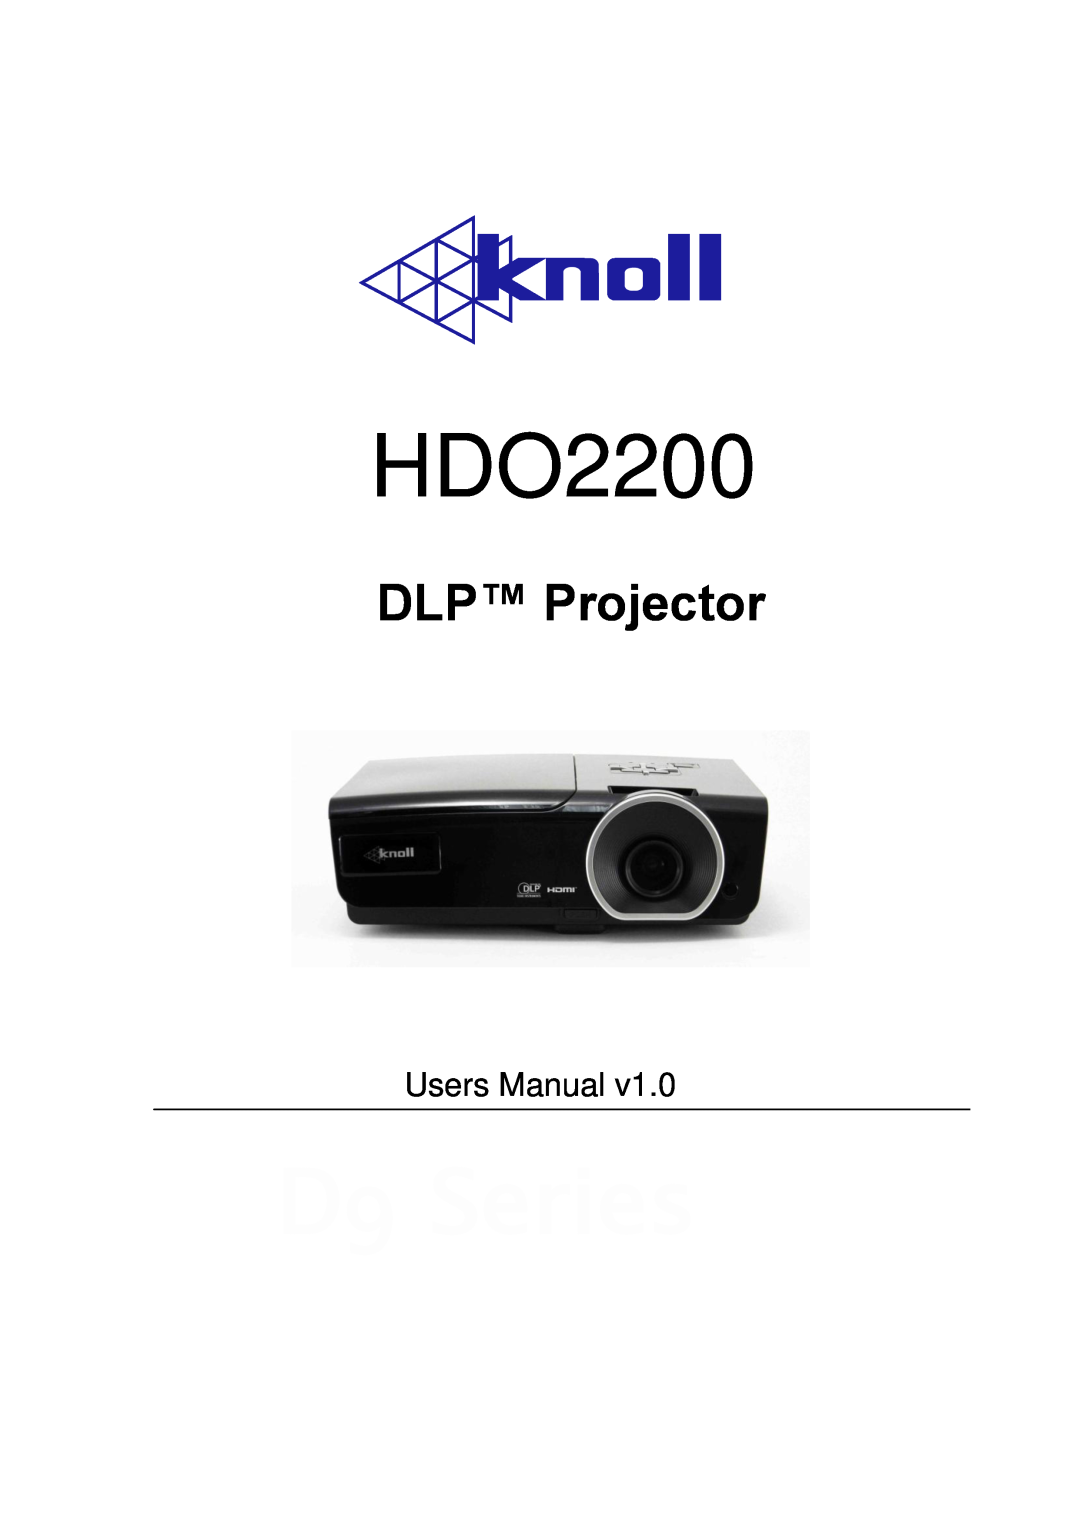 Knoll Systems HDO2200 user manual DLP Projector, Users Manual 